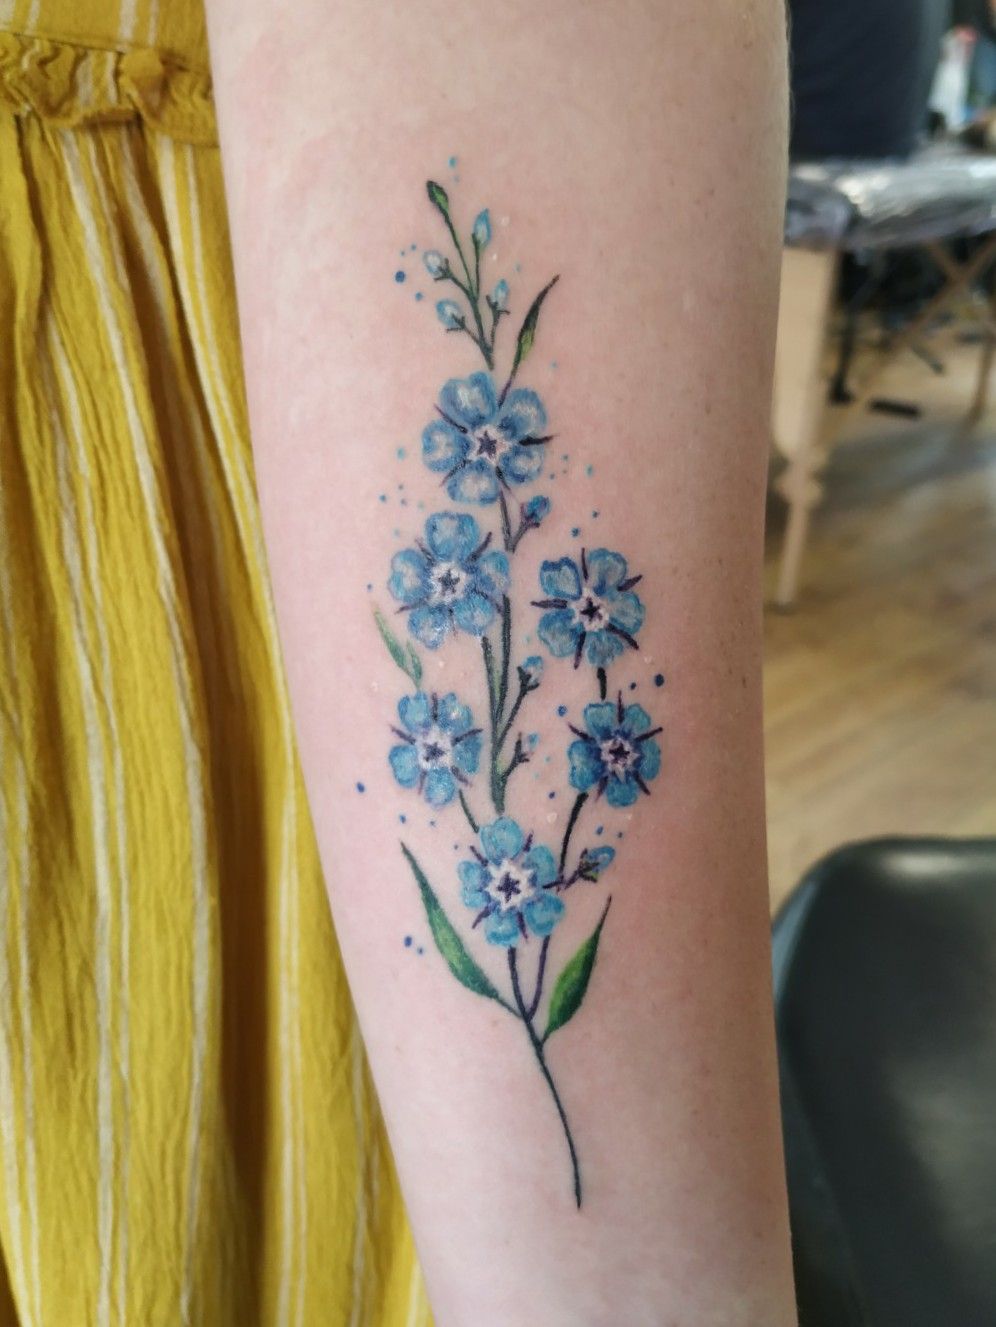 Forget me not matching tattoo for brothers and Mom Details in comments   rTattooDesigns